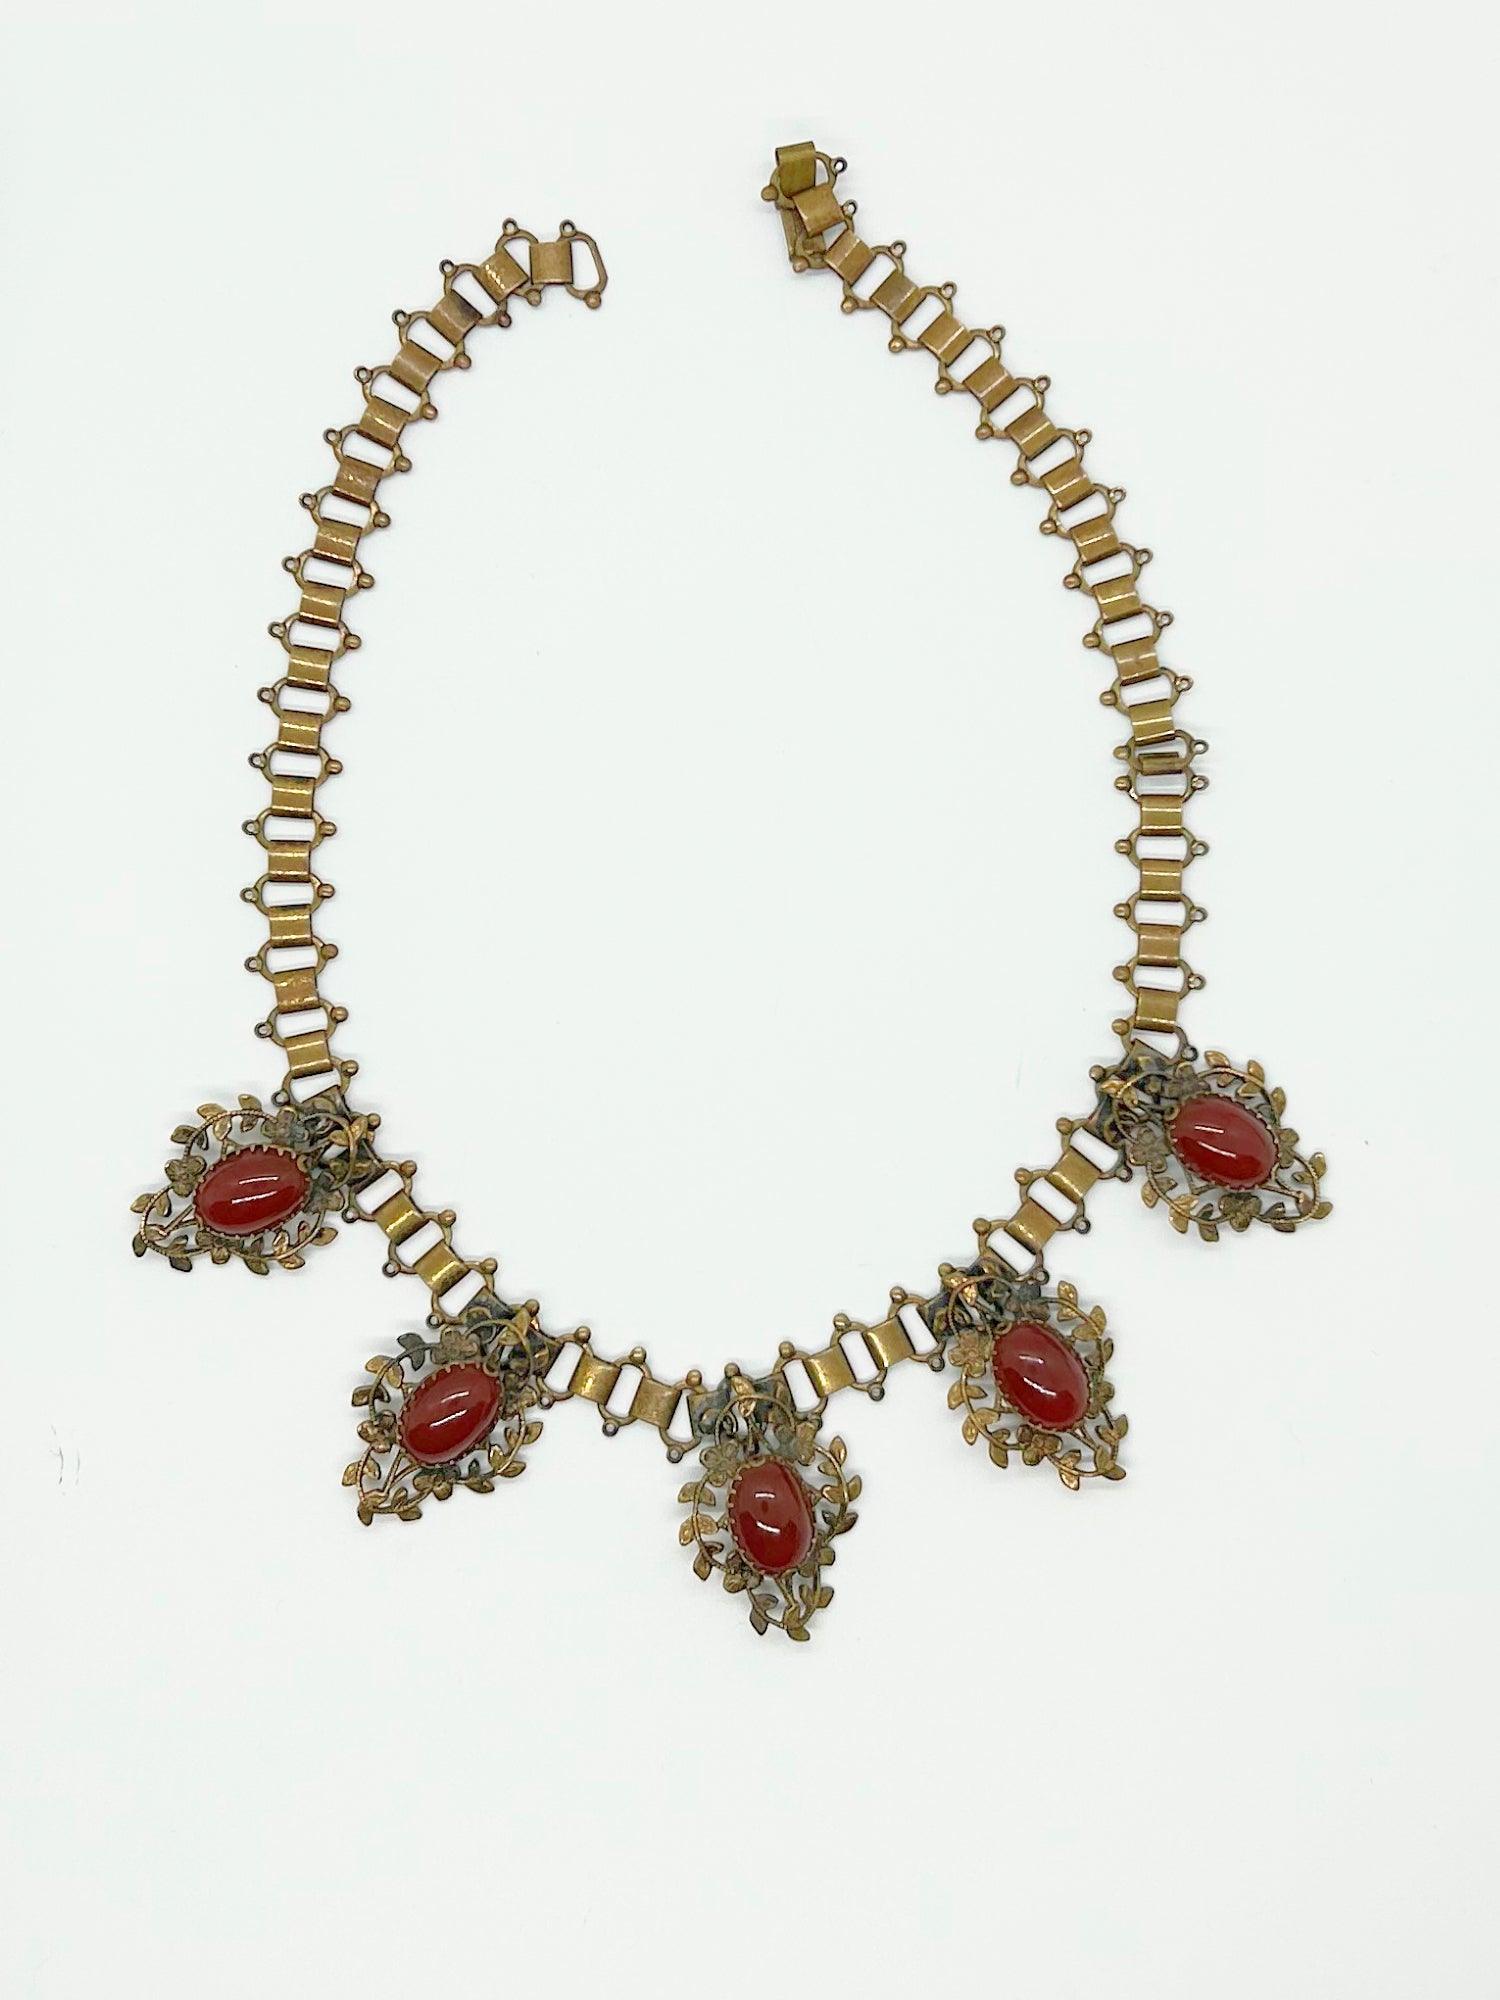 Magnificent Victorian Revival Necklace with Carnelian Colored Stones - Lamoree’s Vintage